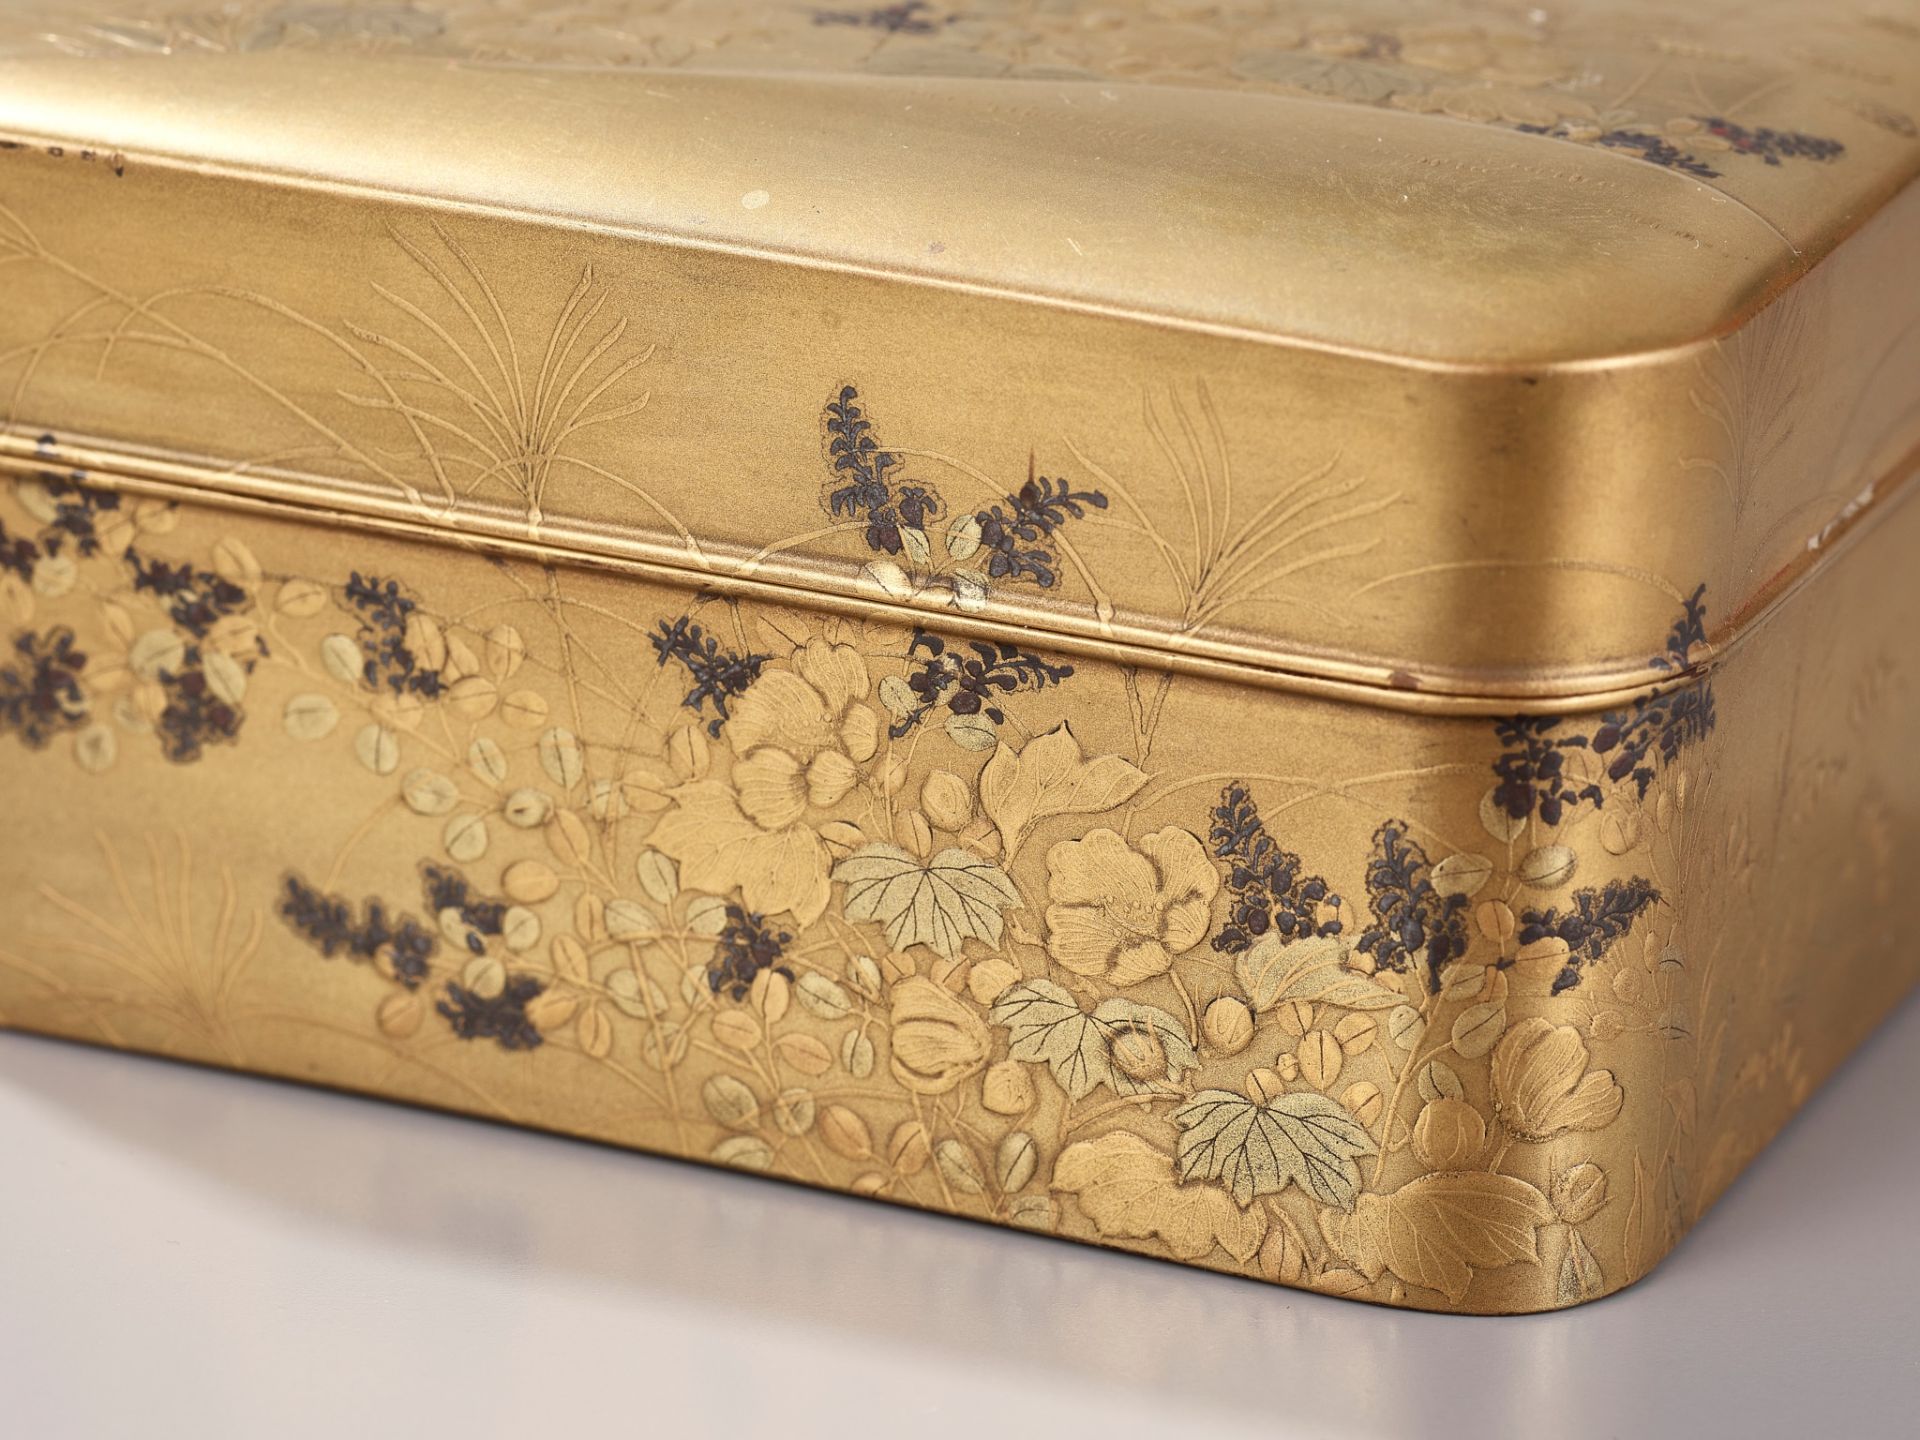 A LACQUER KOBAKO (SMALL BOX) AND COVER WITH AUTUMN FLOWERS - Bild 5 aus 10